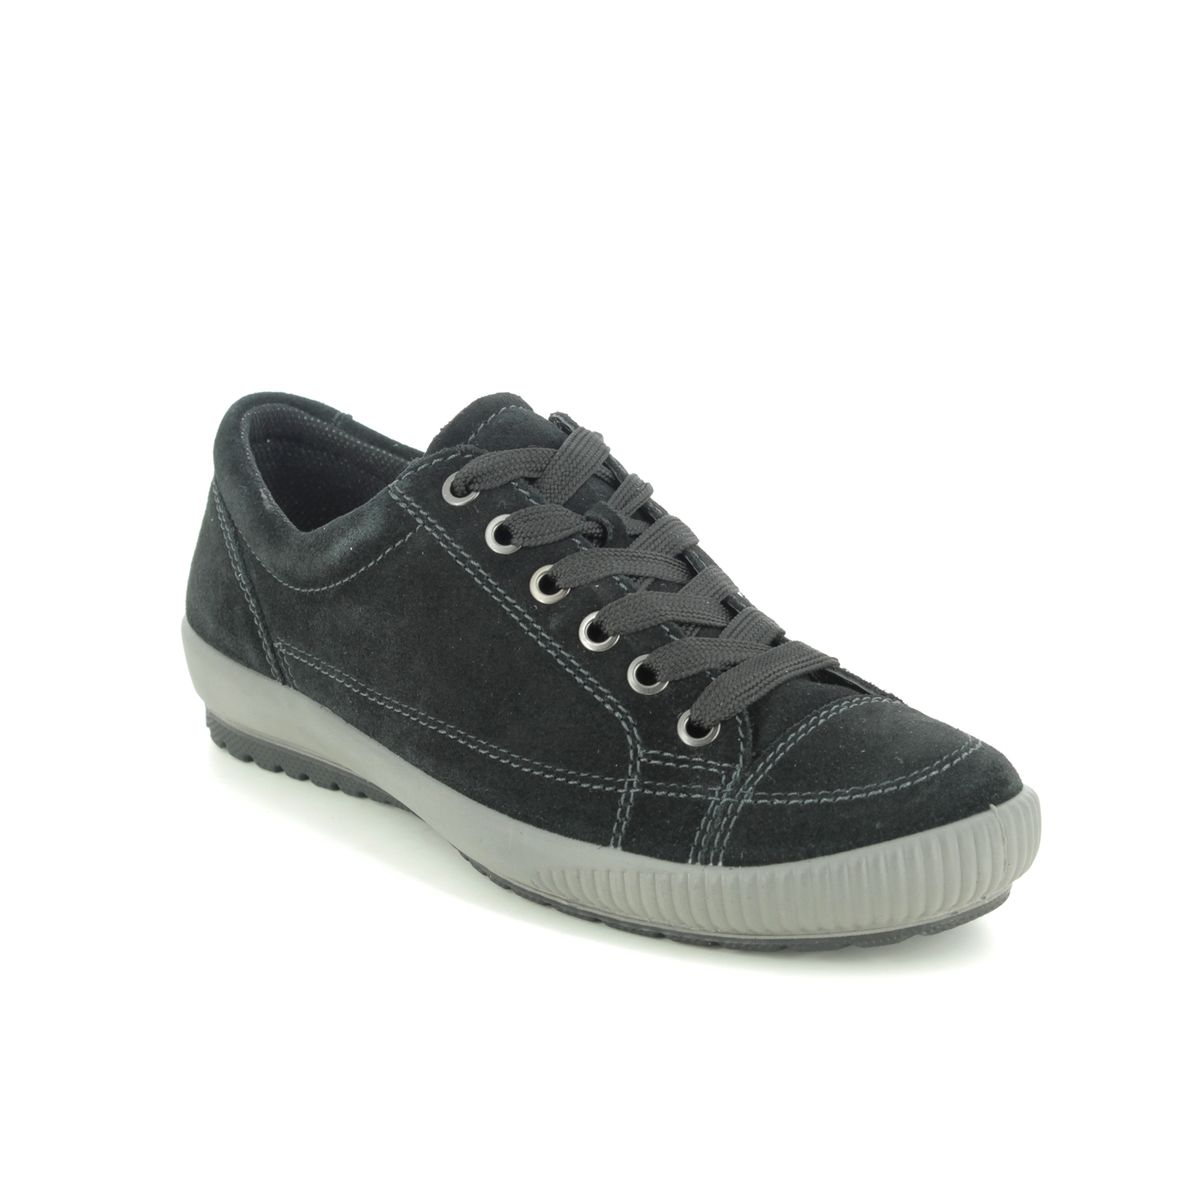 Legero Tanaro Stitch Black Suede Womens Lacing Shoes 0800820-0000 In Size 5.5 In Plain Black Suede